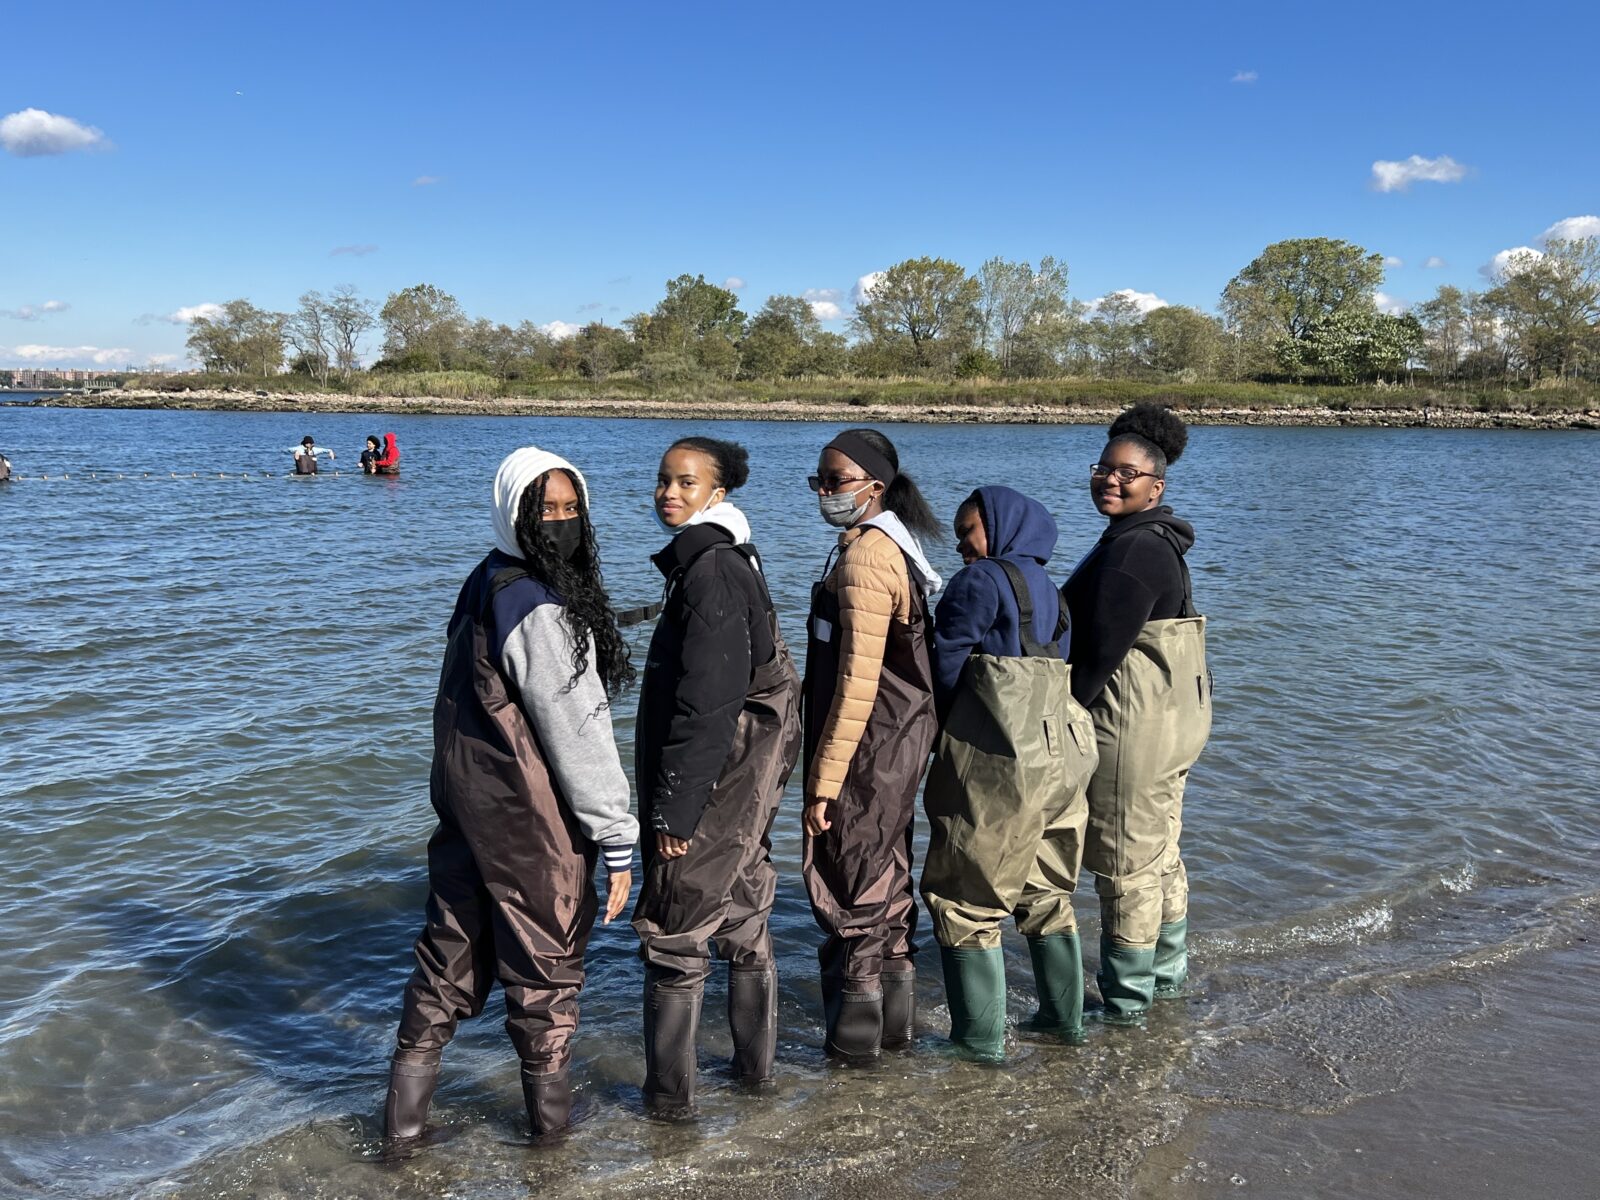 Five young people wearing waders stand on a shore looking back at the camera.